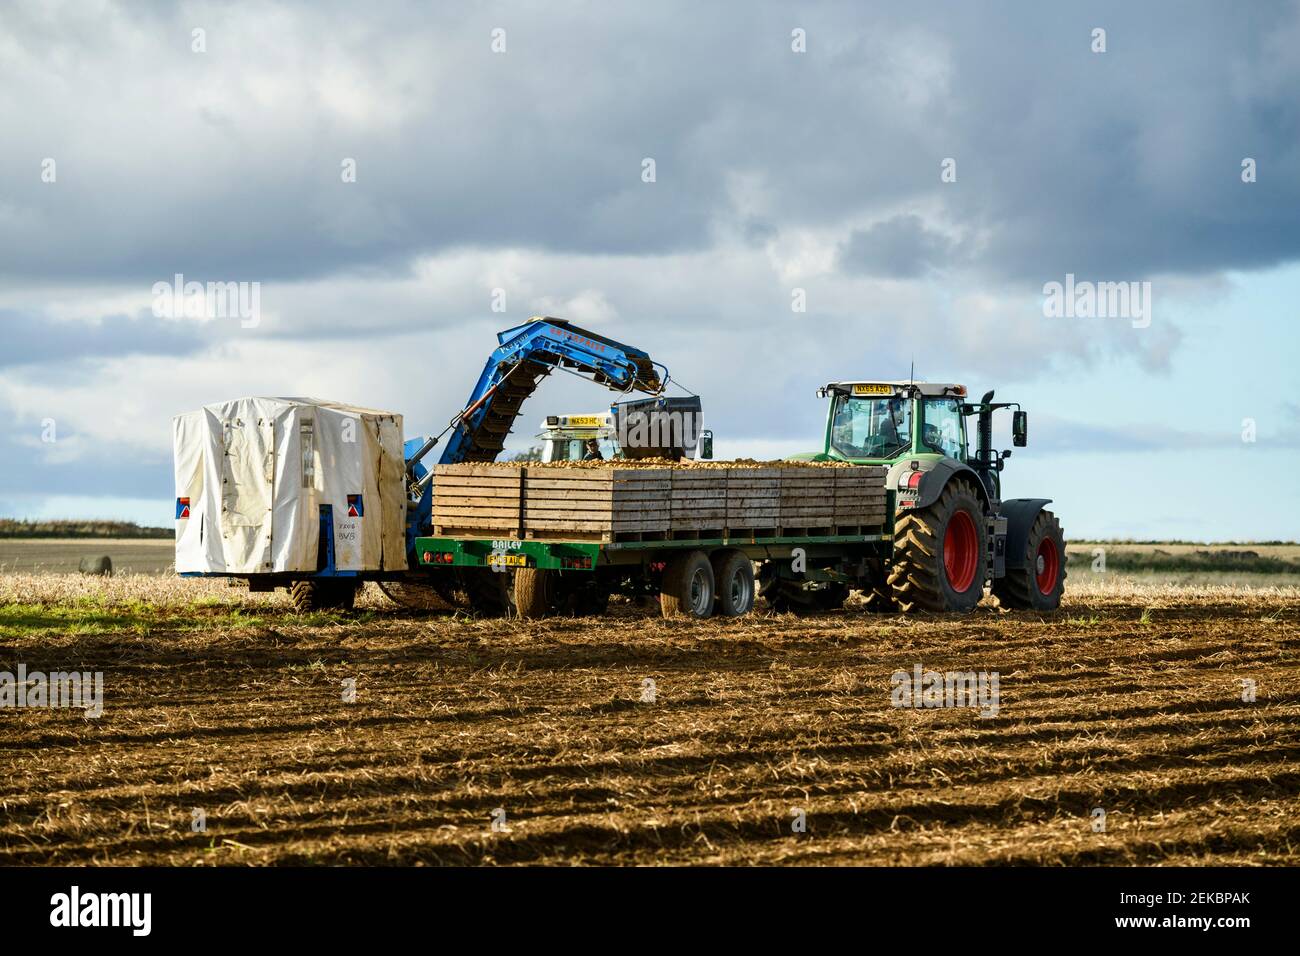 Farmers in tractors working in sunny field harvesting potatoes (tractor & potato harvester, filling boxes on trailer) - North Yorkshire, England GB UK Stock Photo